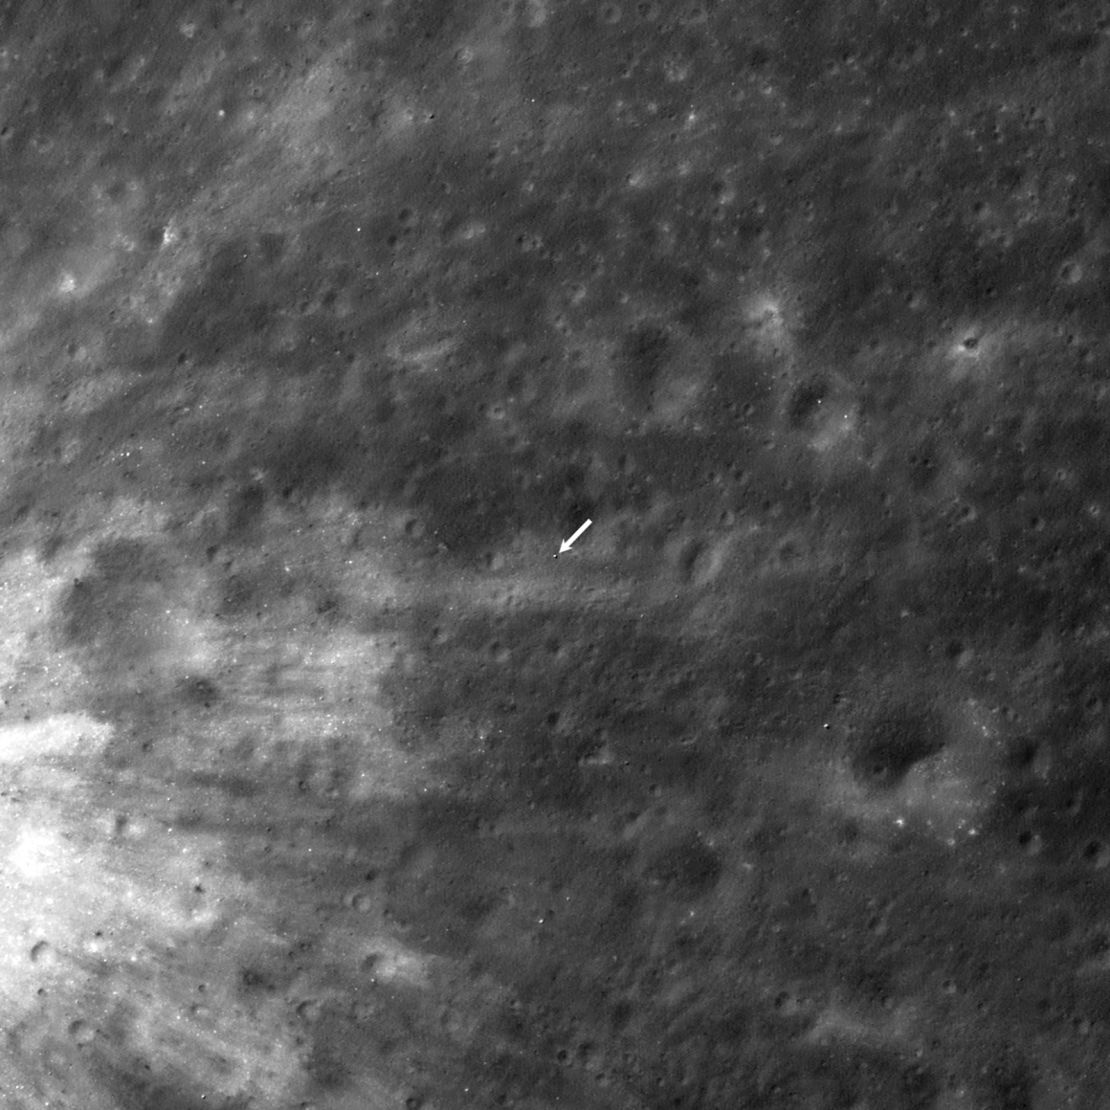 A white arrow points to the location of the SLIM lander on the lunar surface, as imaged by the Lunar Reconnaissance Orbiter.